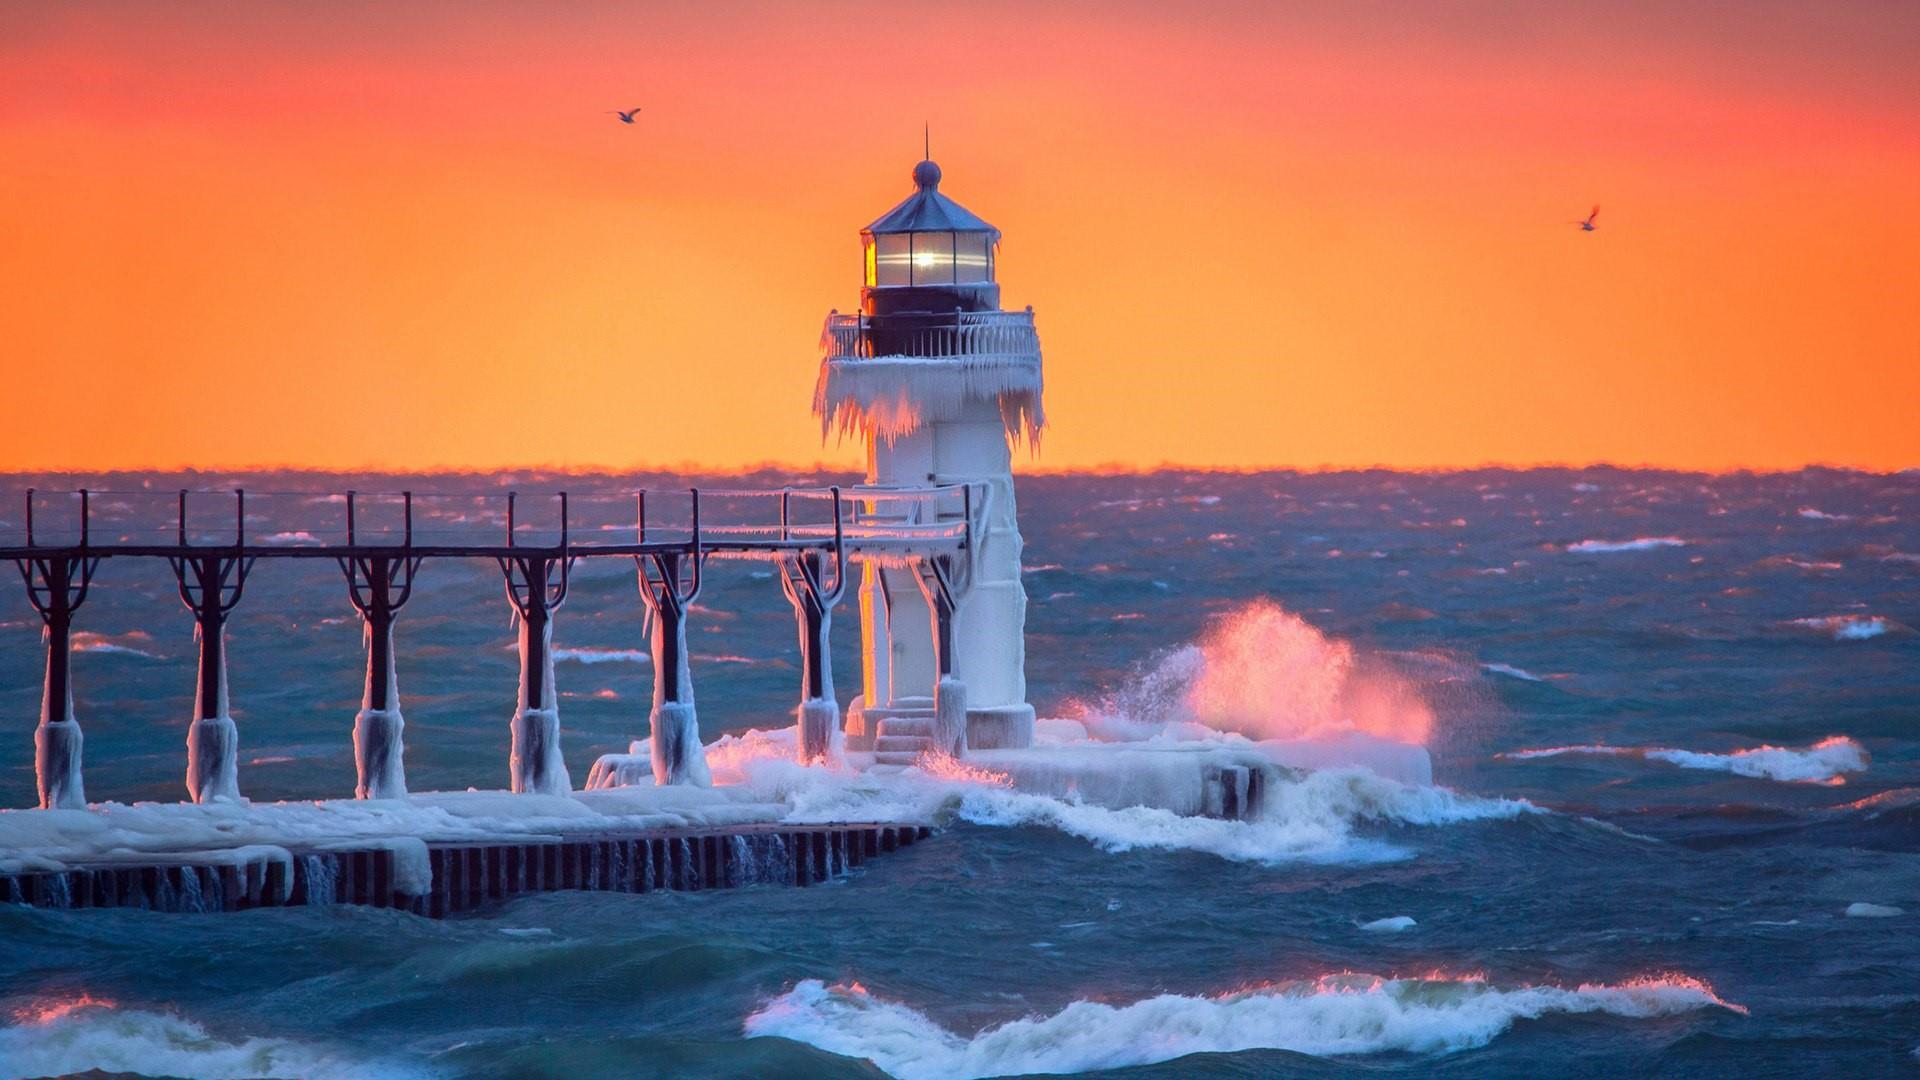 St Joseph North Pier Lighthouse in the sunset wallpaper - backiee